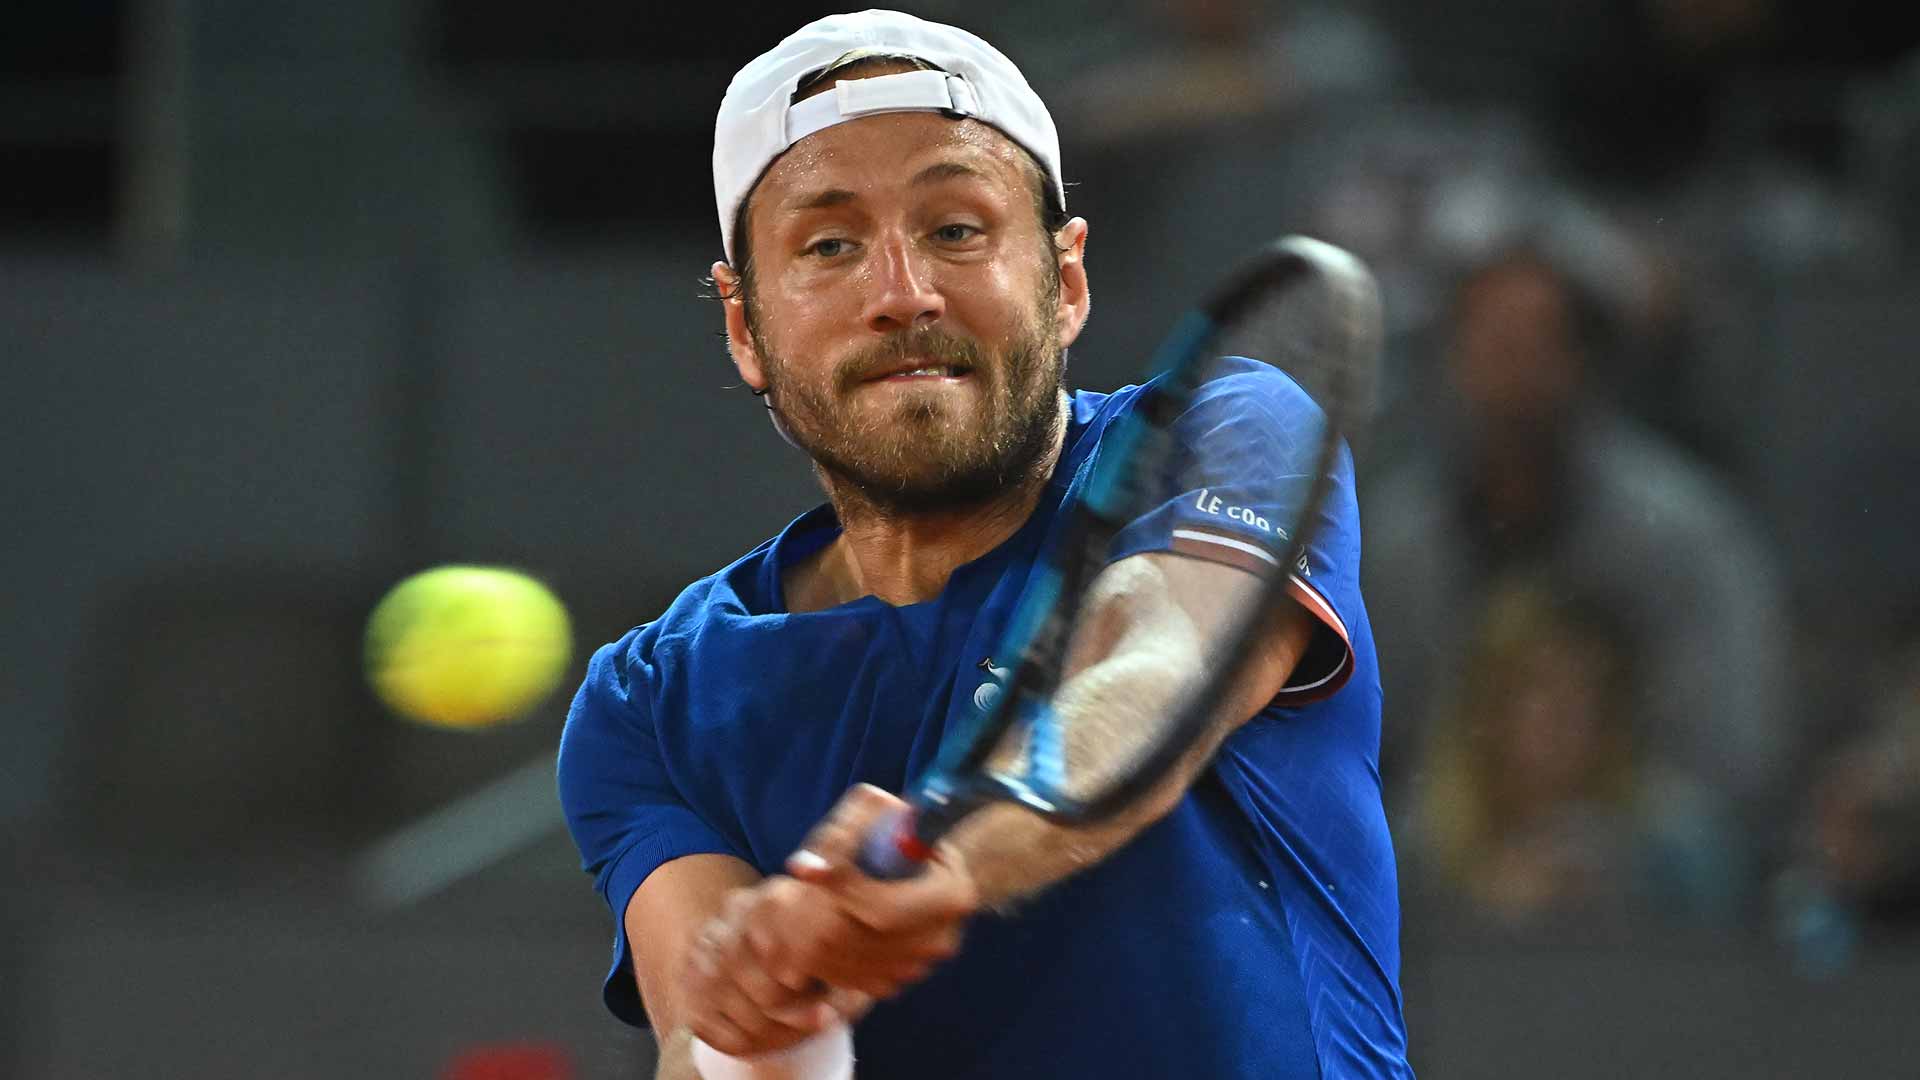 Former Top 10 Star Pouille Qualifies For Roland Garros